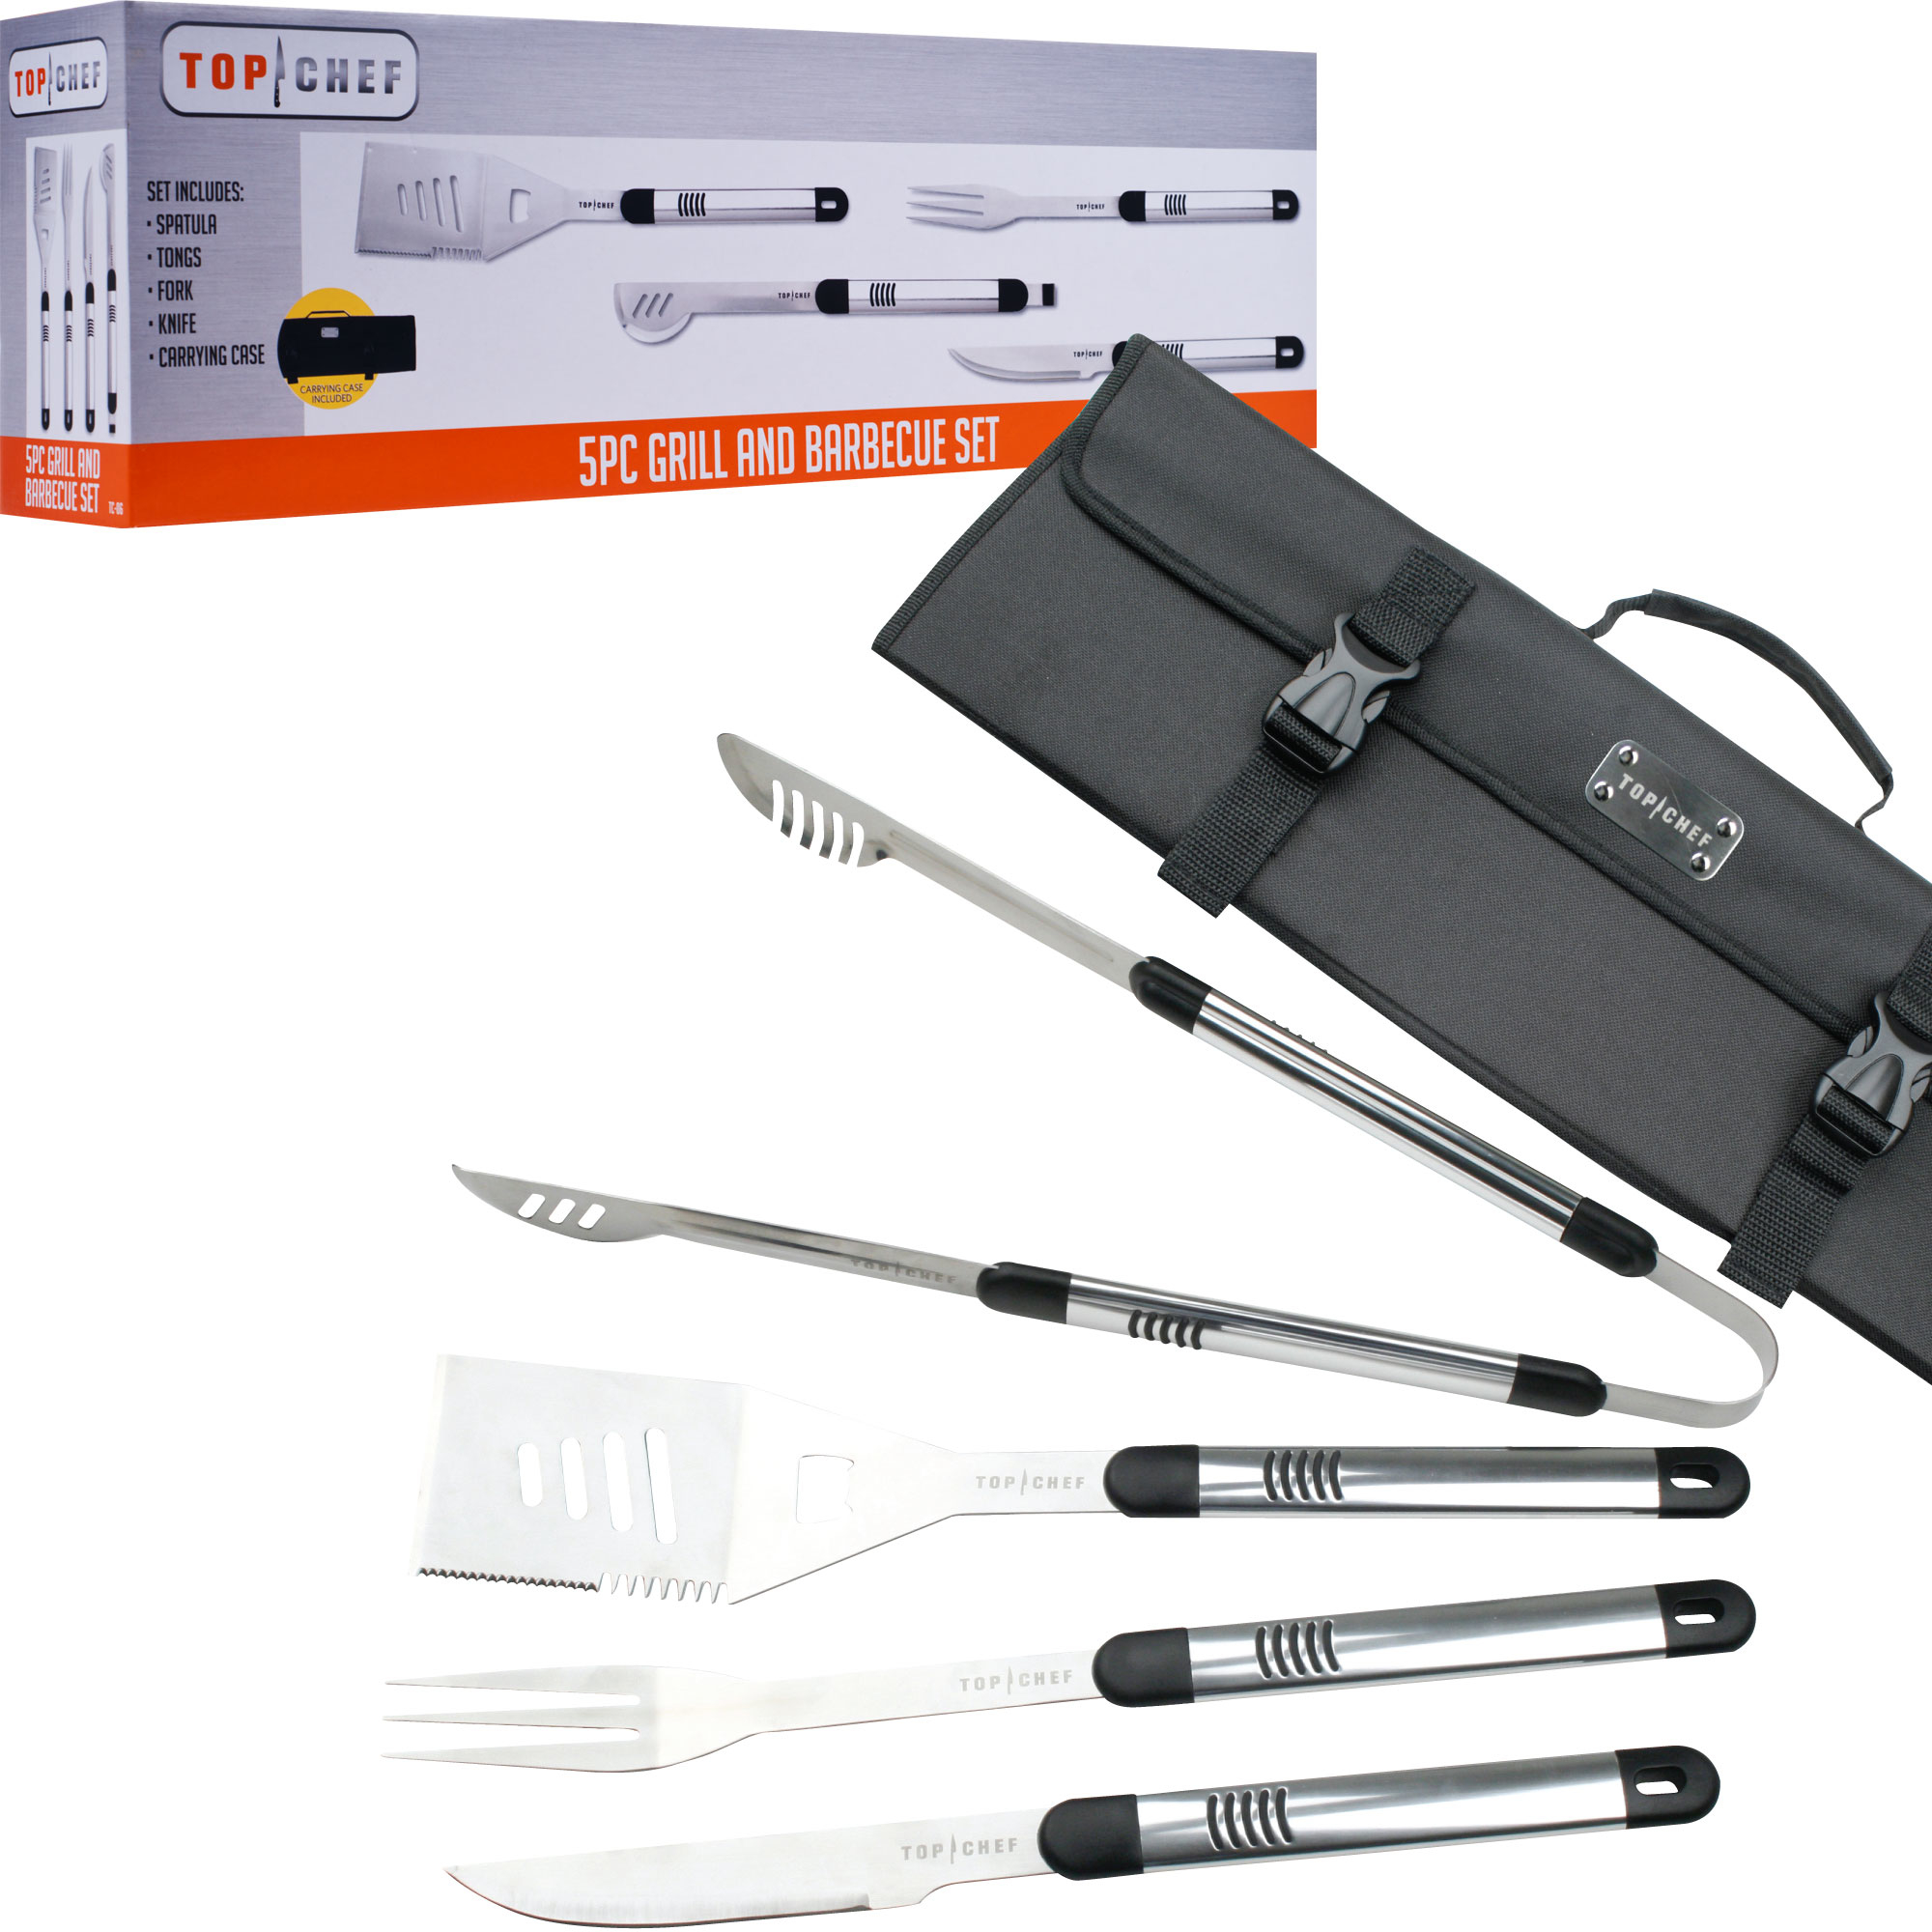 Top Chef Stainless Steel BBQ Set - 5 Pieces